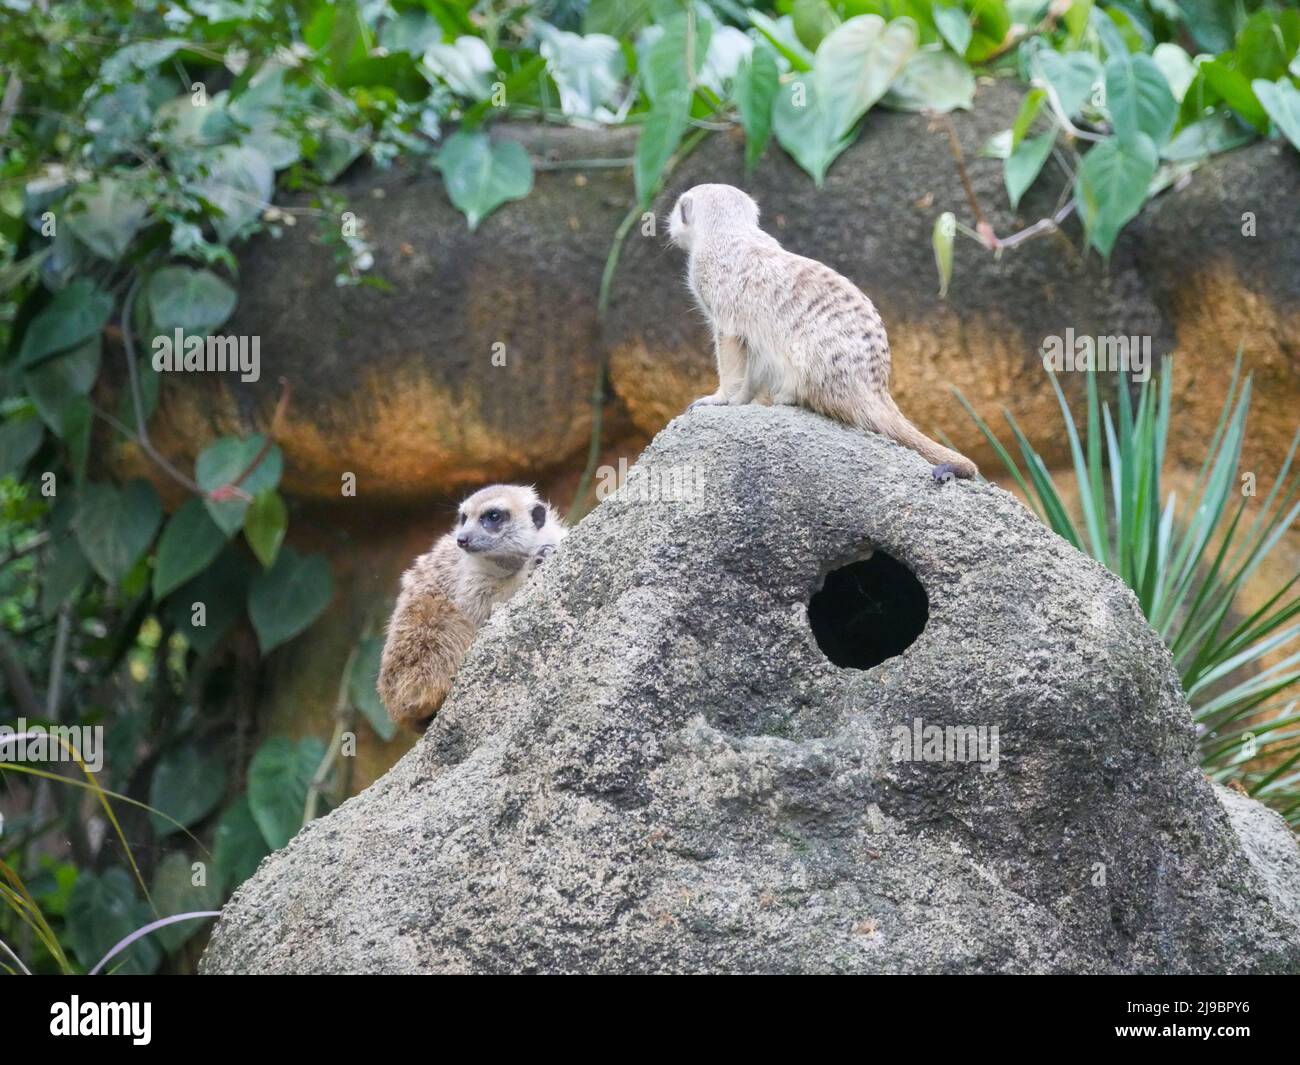 Meerkat (Suricata suricatta) or suricate is a small mongoose found in southern Africa. It is characterised by a broad head, large eyes, a pointed snou Stock Photo